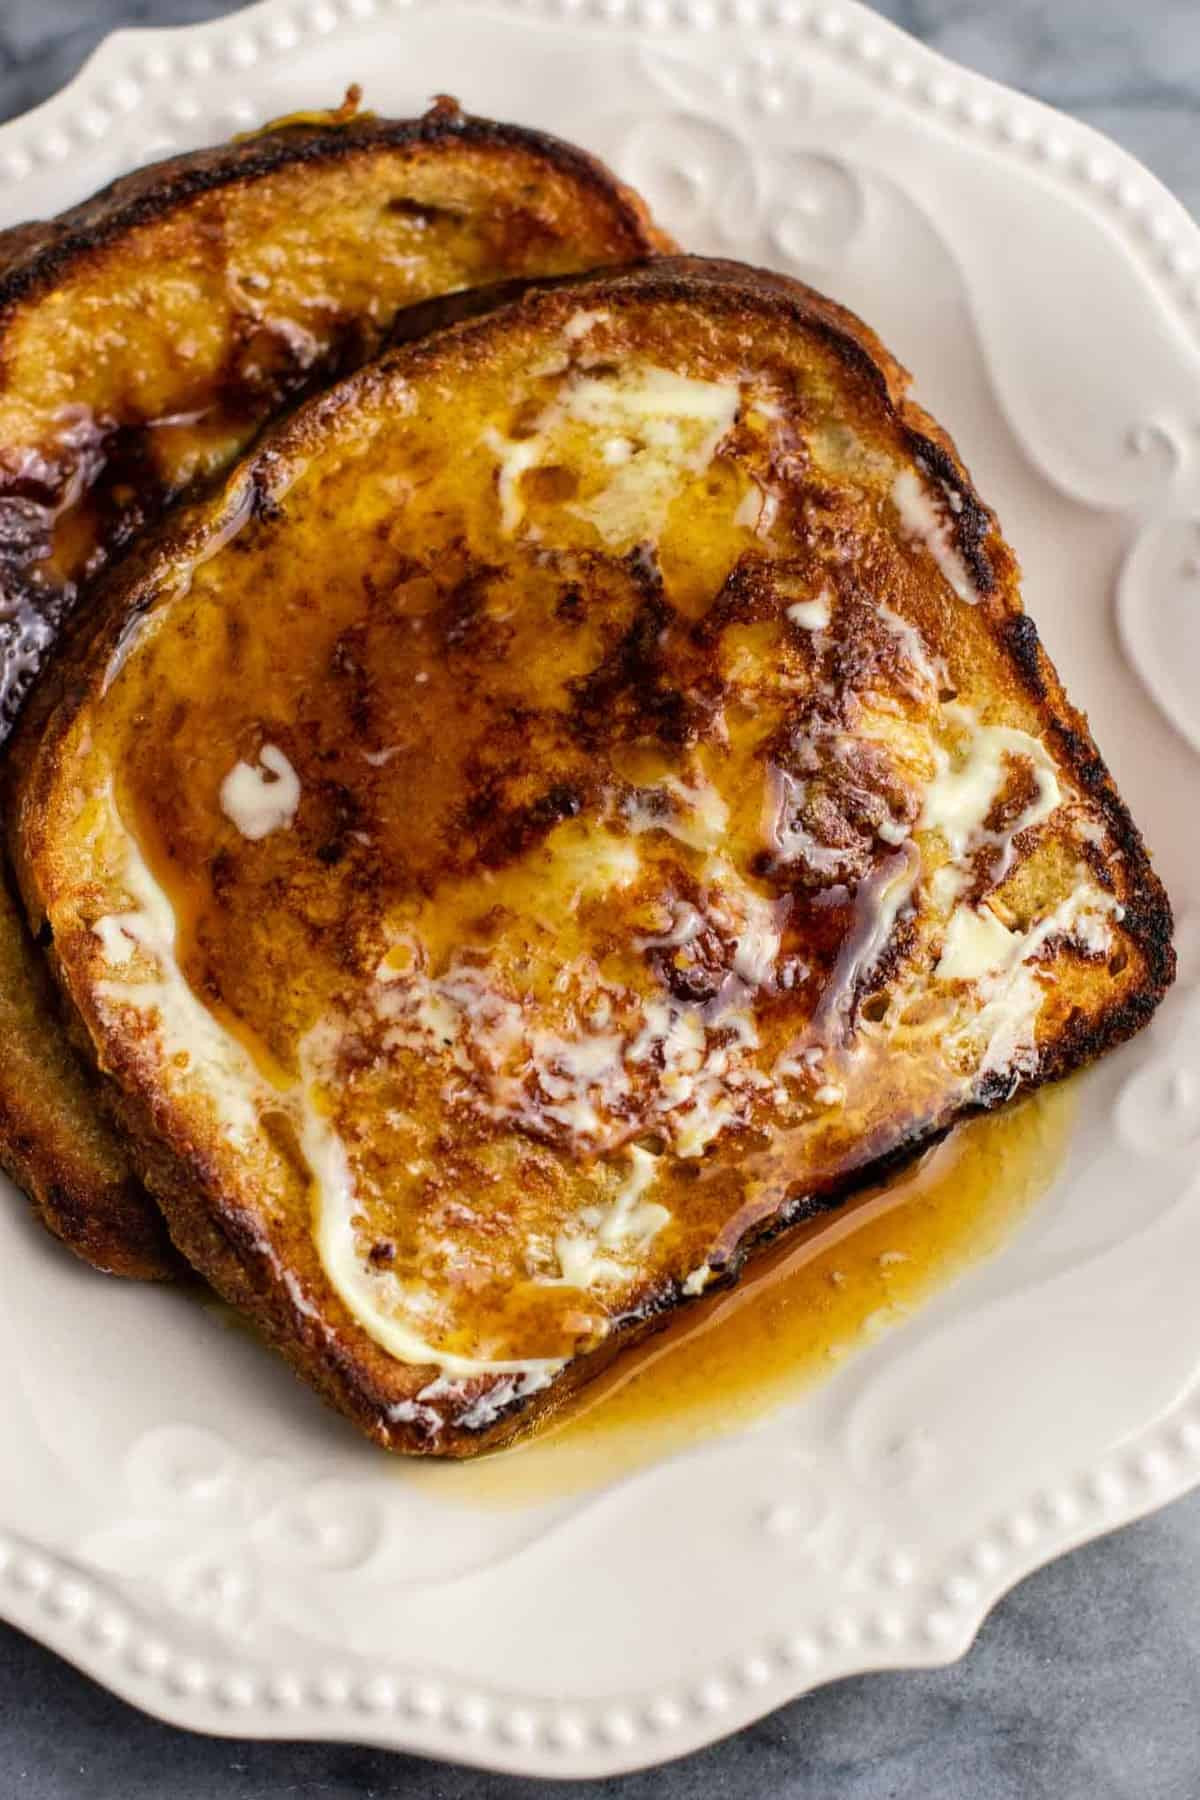 Eggnog French toast Recipes Best Of Easy Eggnog French toast Recipe Build Your Bite